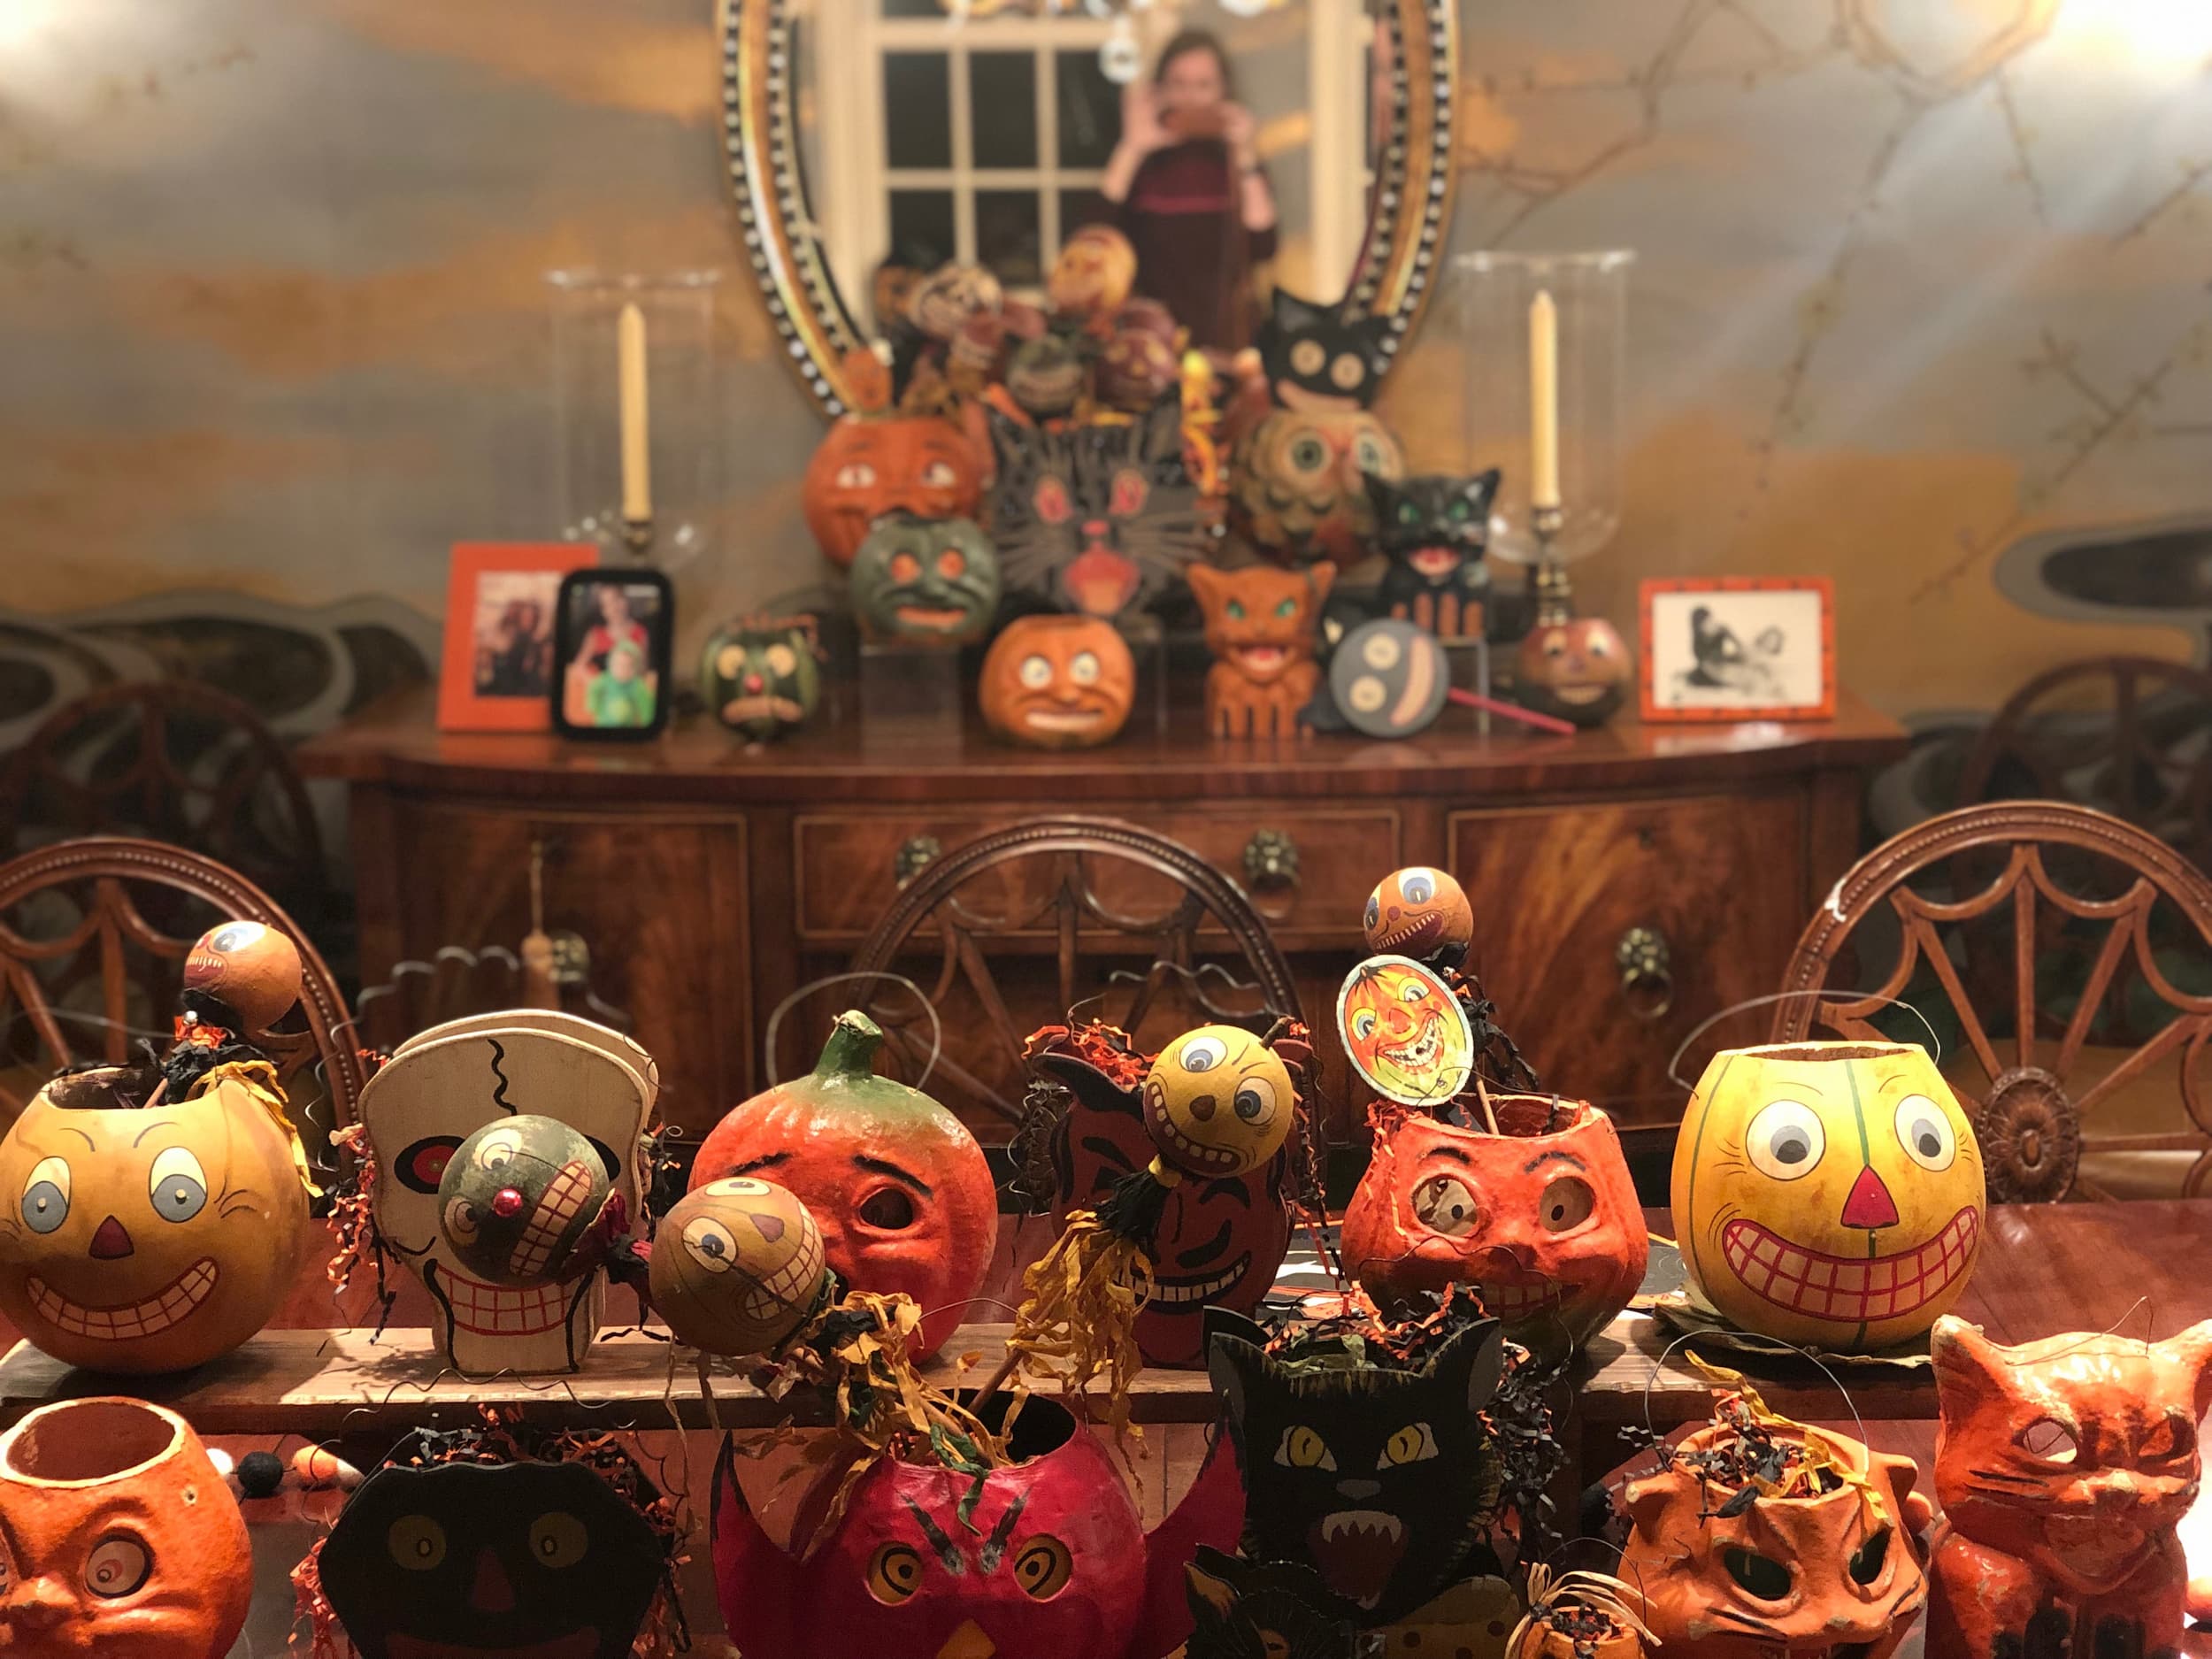 Gretchen's Halloween traditions